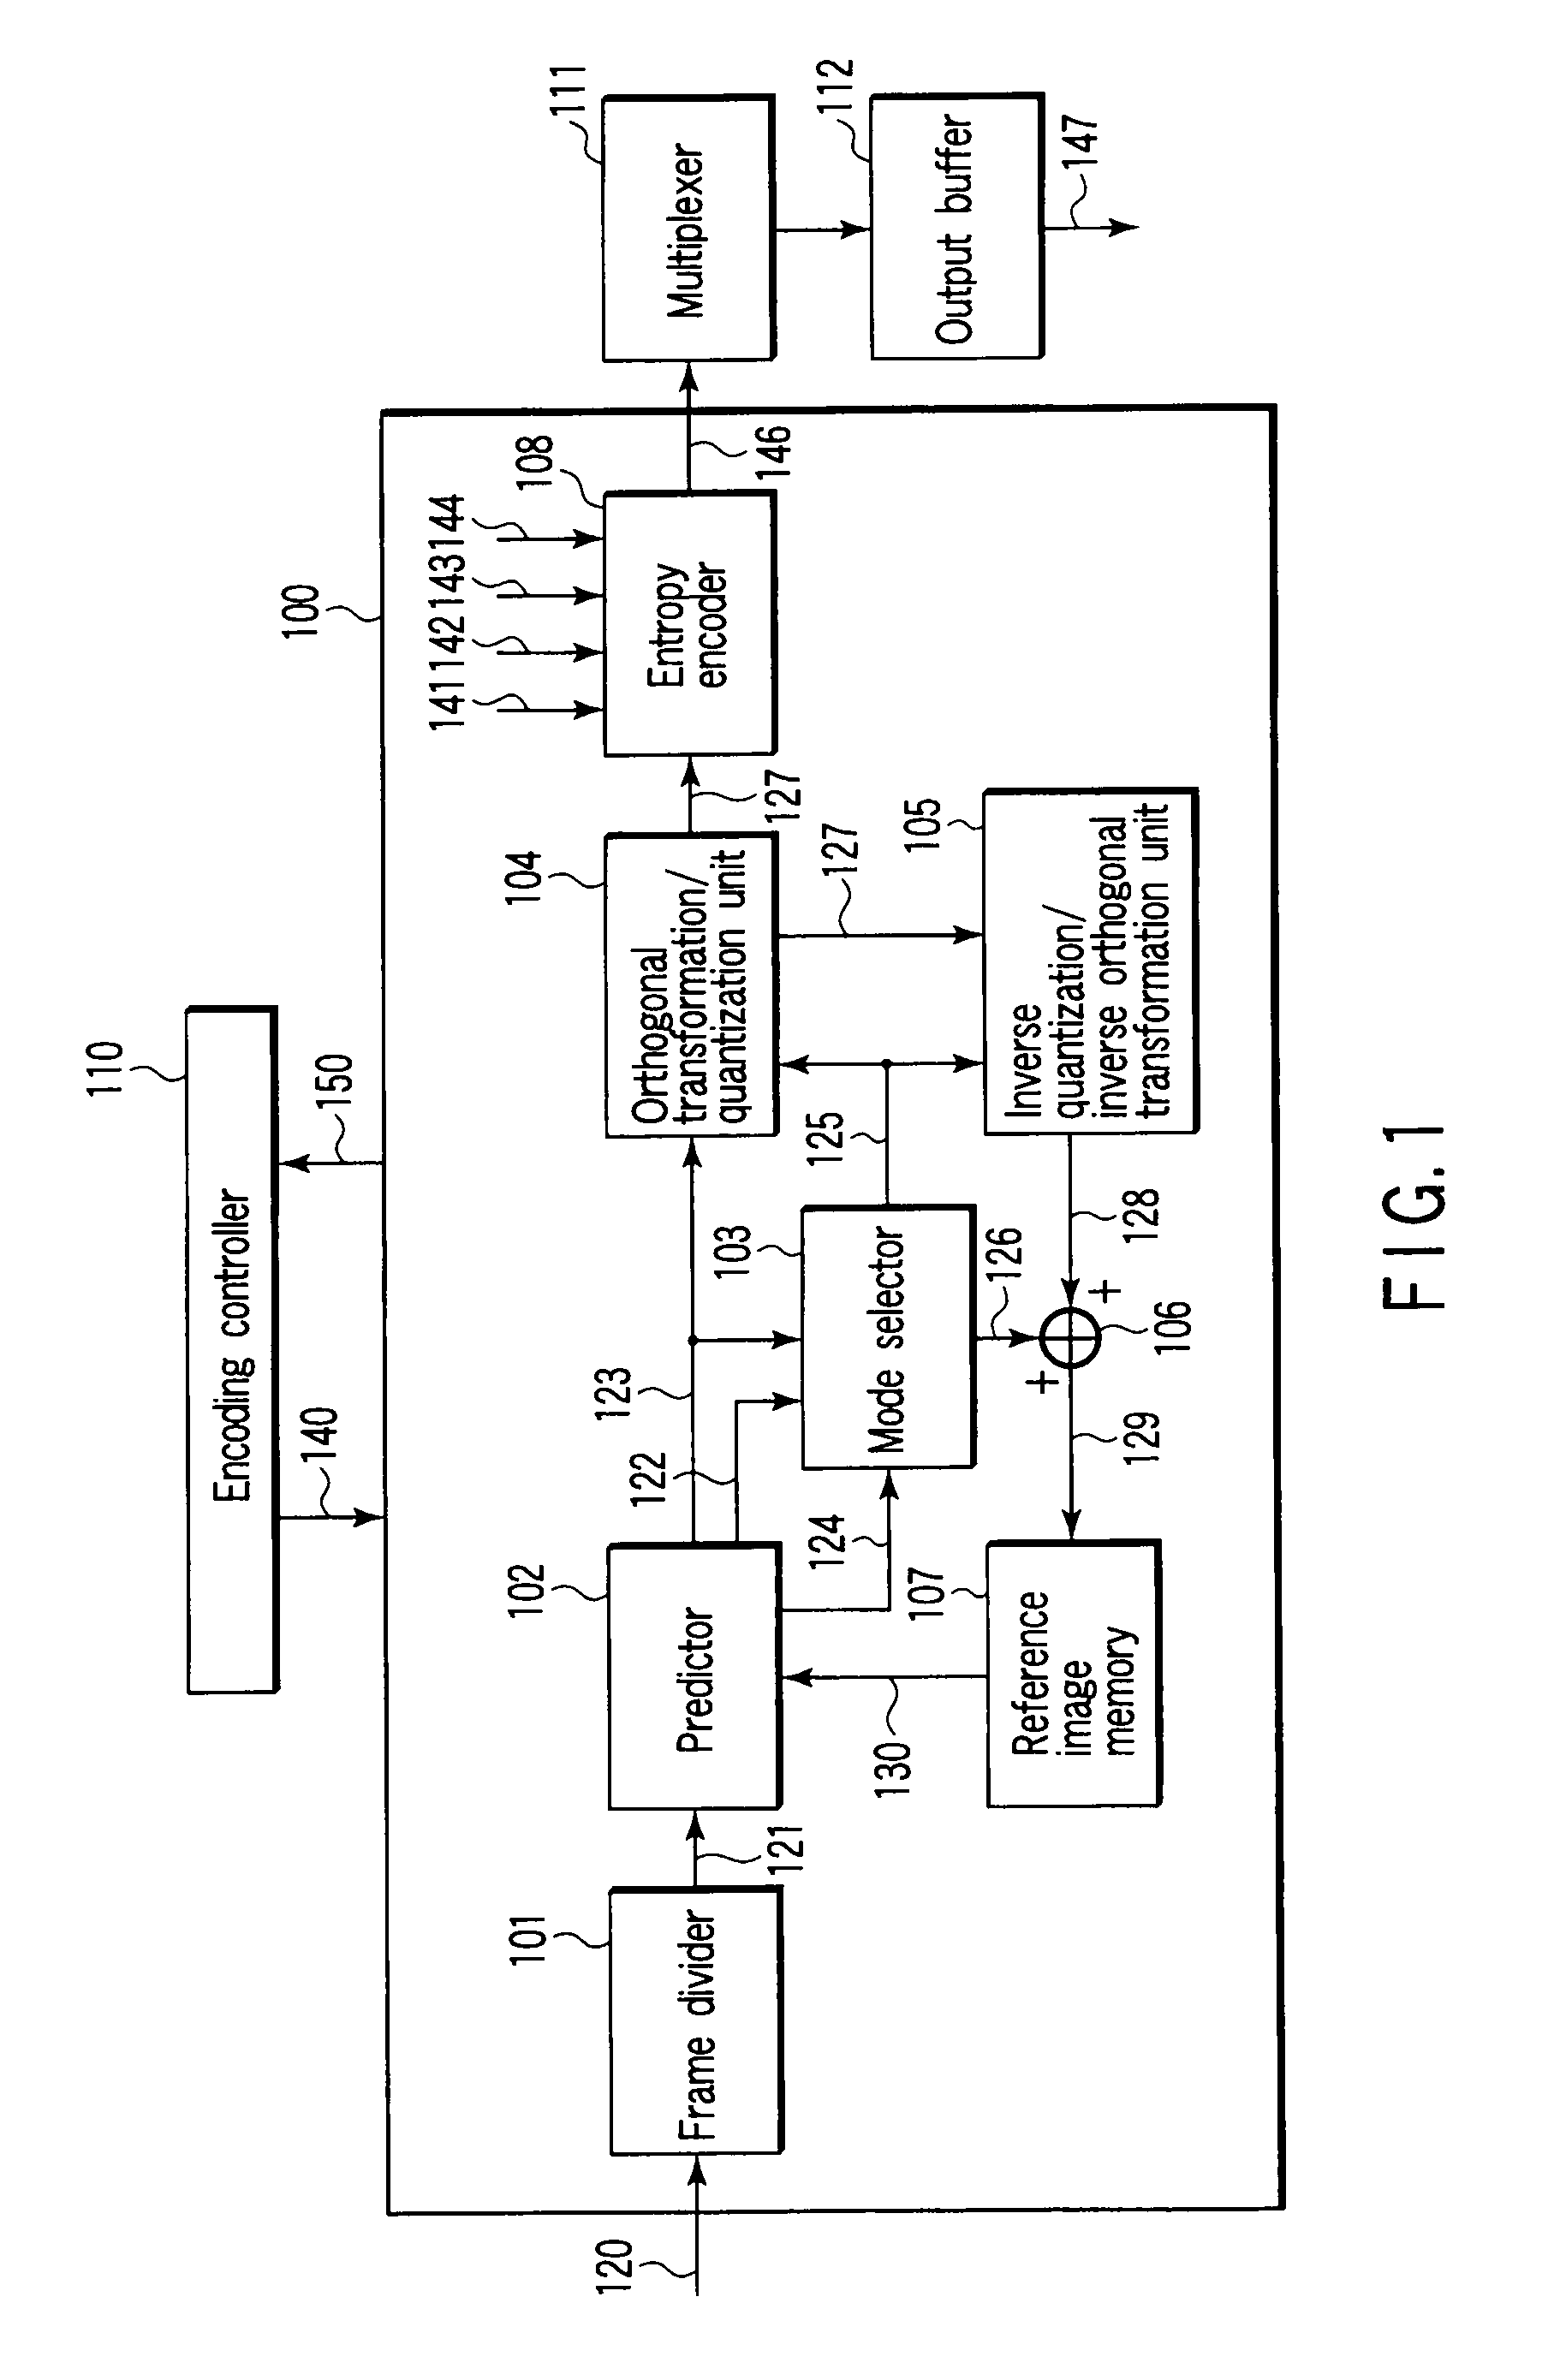 Image encoding and decoding method and apparatus